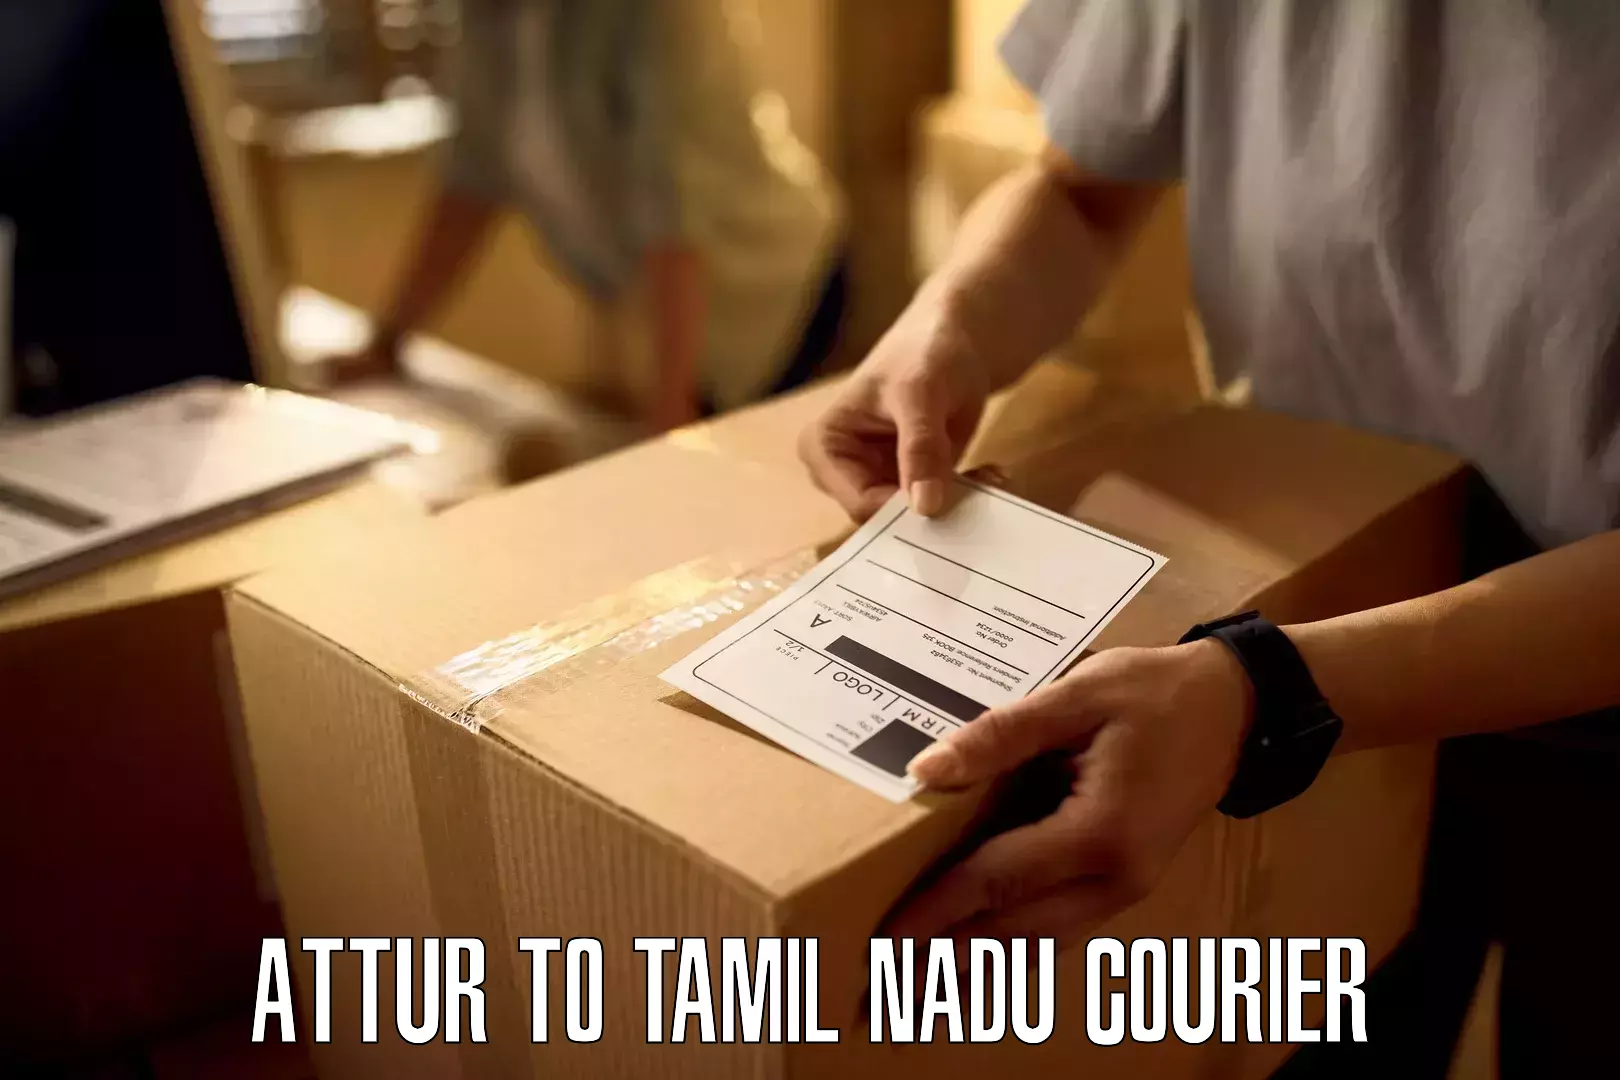 Nationwide delivery network Attur to Tamil Nadu